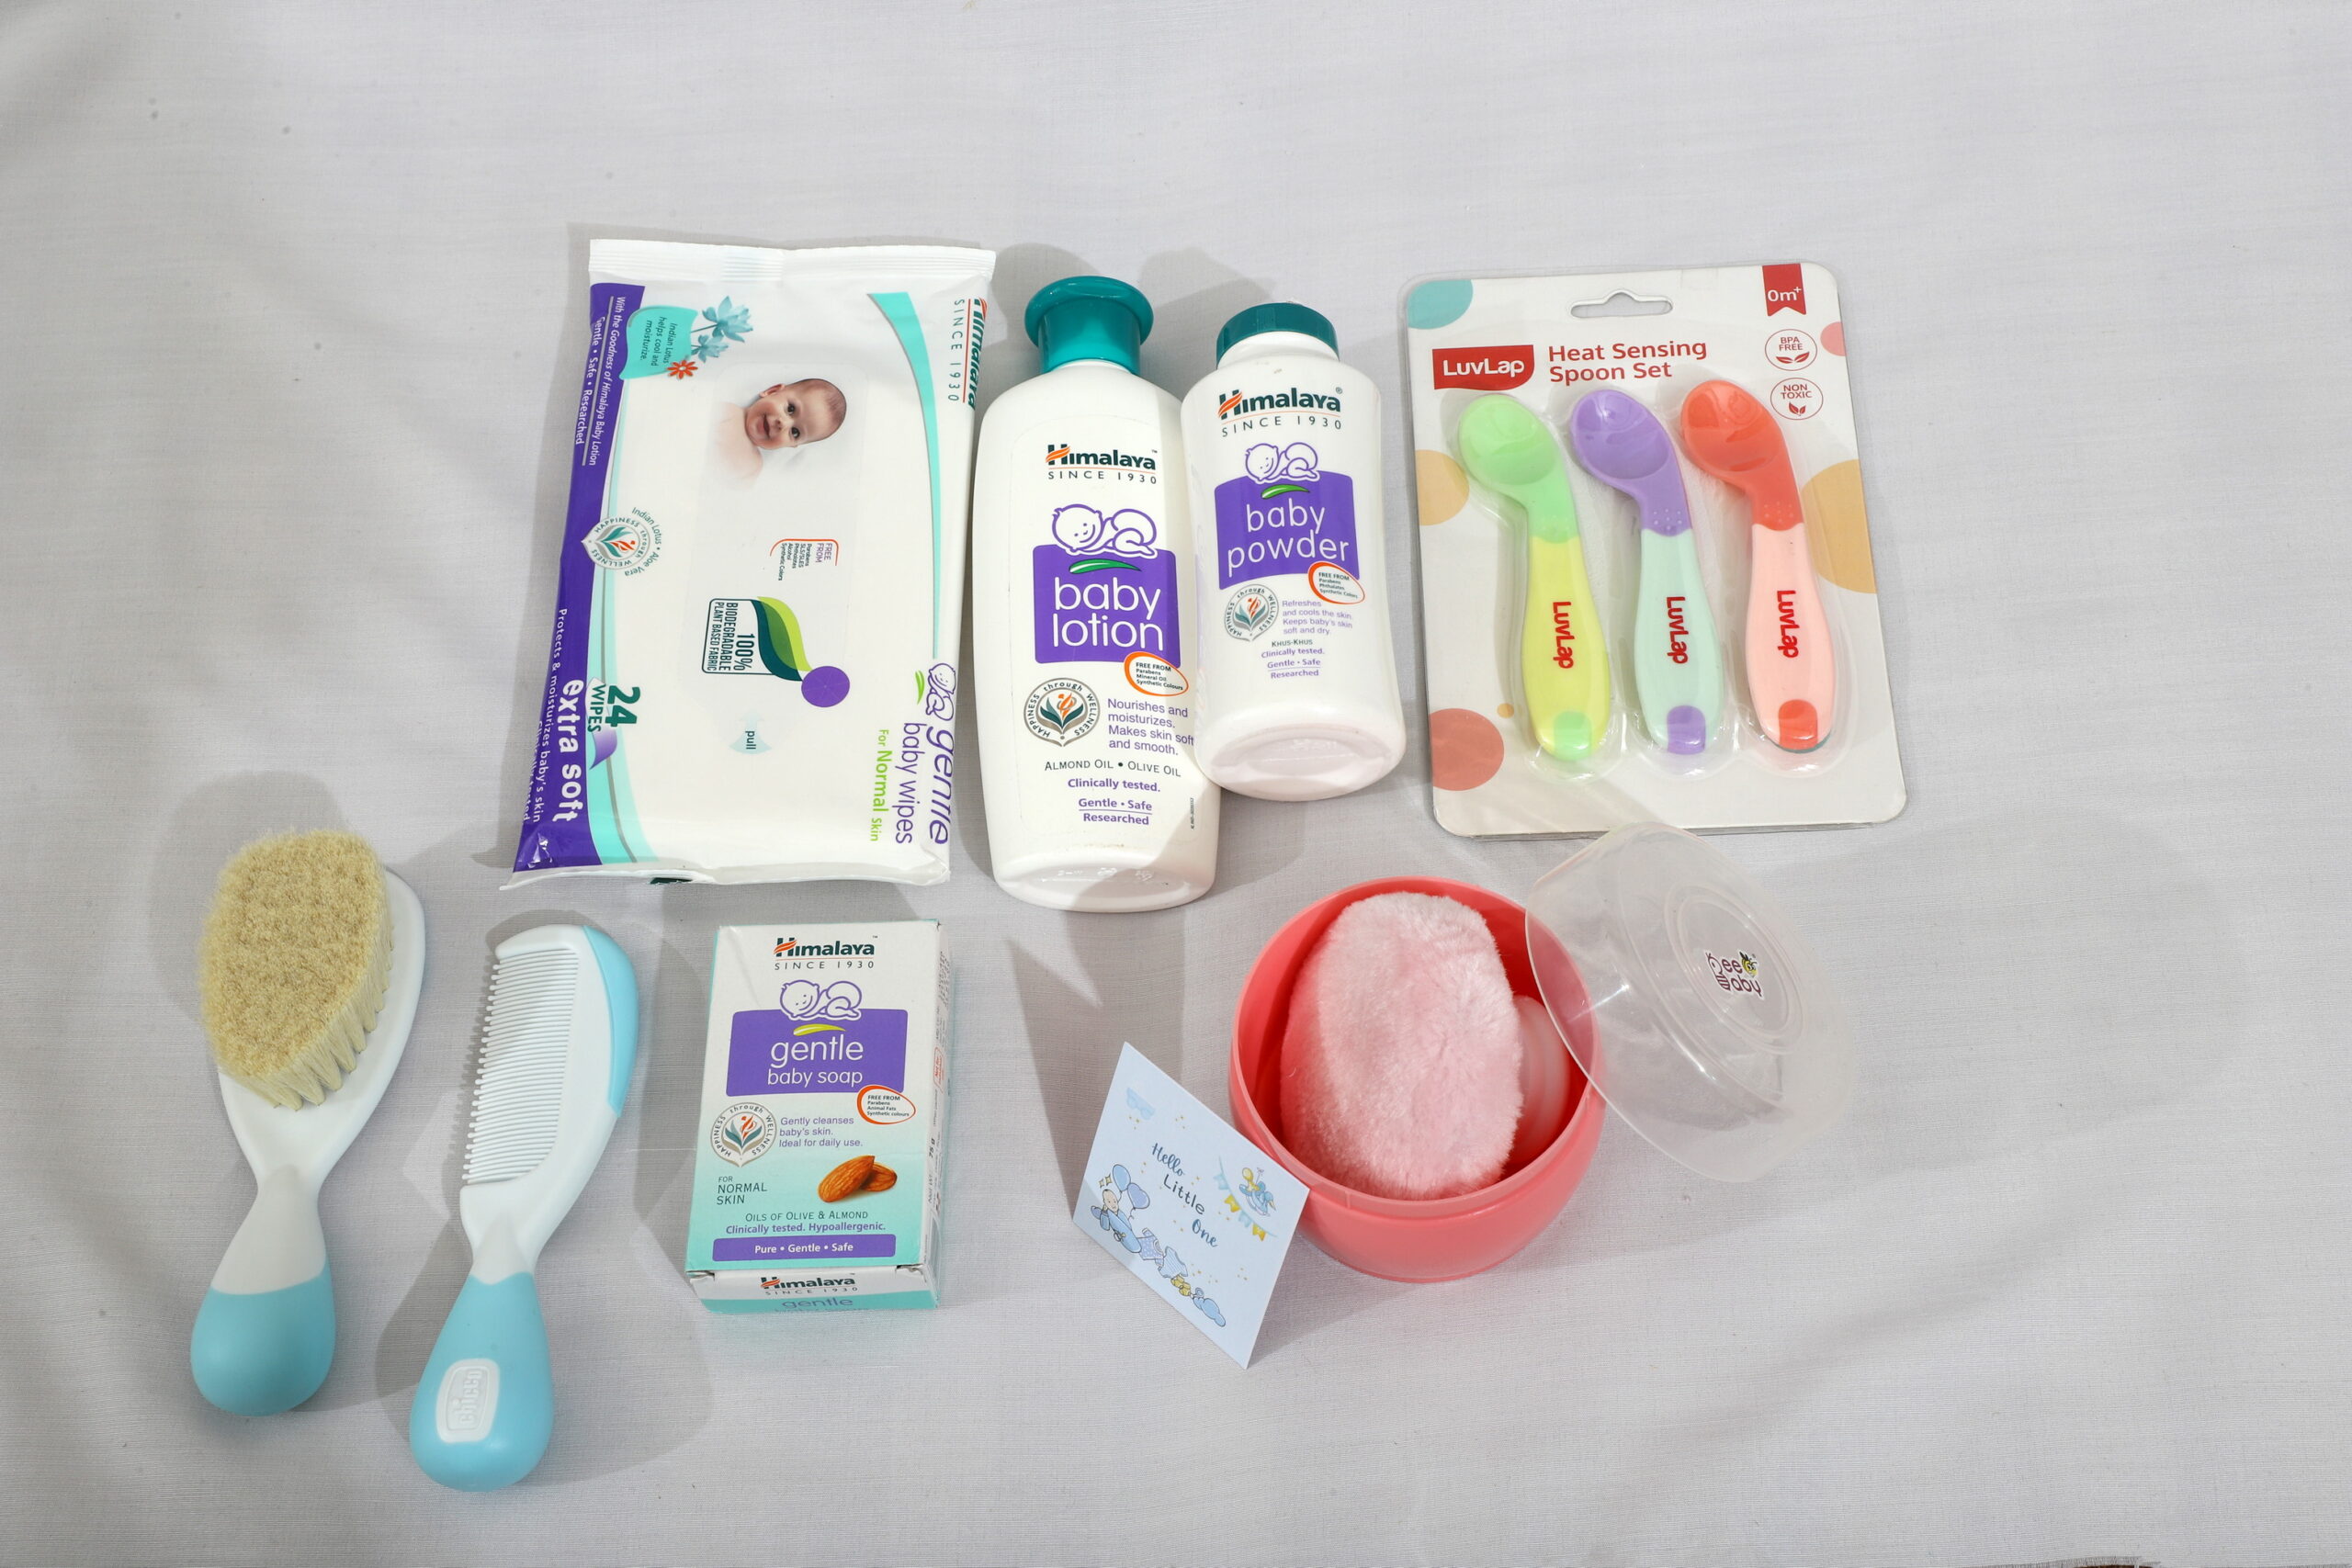 Himalaya Herbals Babycare Gift Pack&Babycare Gift Basket : Amazon.in: Baby  Products